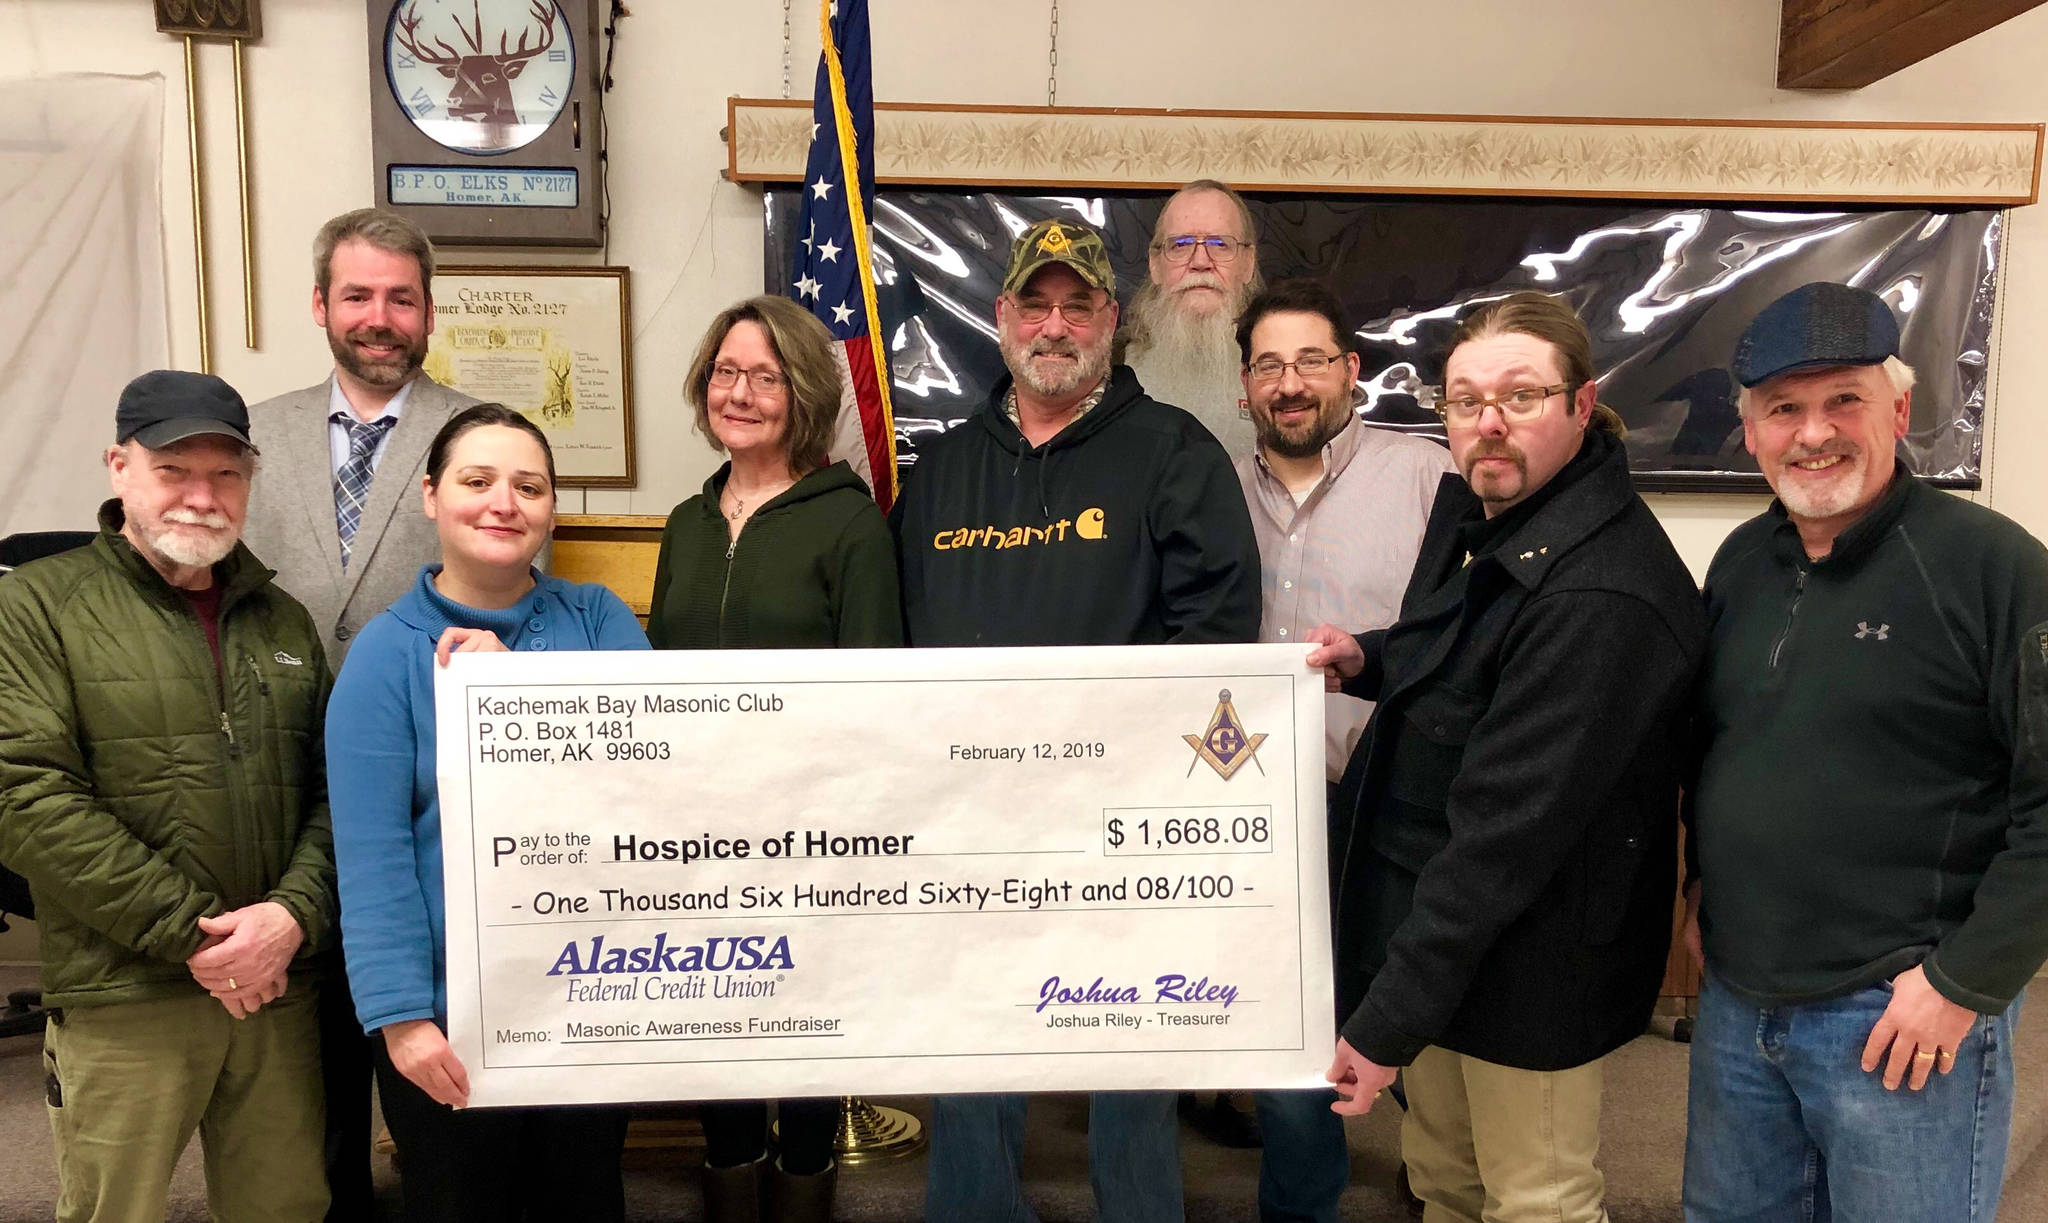 Members of the Kachemak Bay Masonic Club presented Hospice of Homer with a check for $1,668.08 on Feb. 12, 2019, at the Homer Elks Lodge in Homer, Alaska. From left to right are Michael Hawfield, Vern Miller, Jessica Golden, Beth Graber, Barry Haynes, Grady Svoboda, Erik Groves, Joshua Riley and Tom Stroozas. (Photo provided)